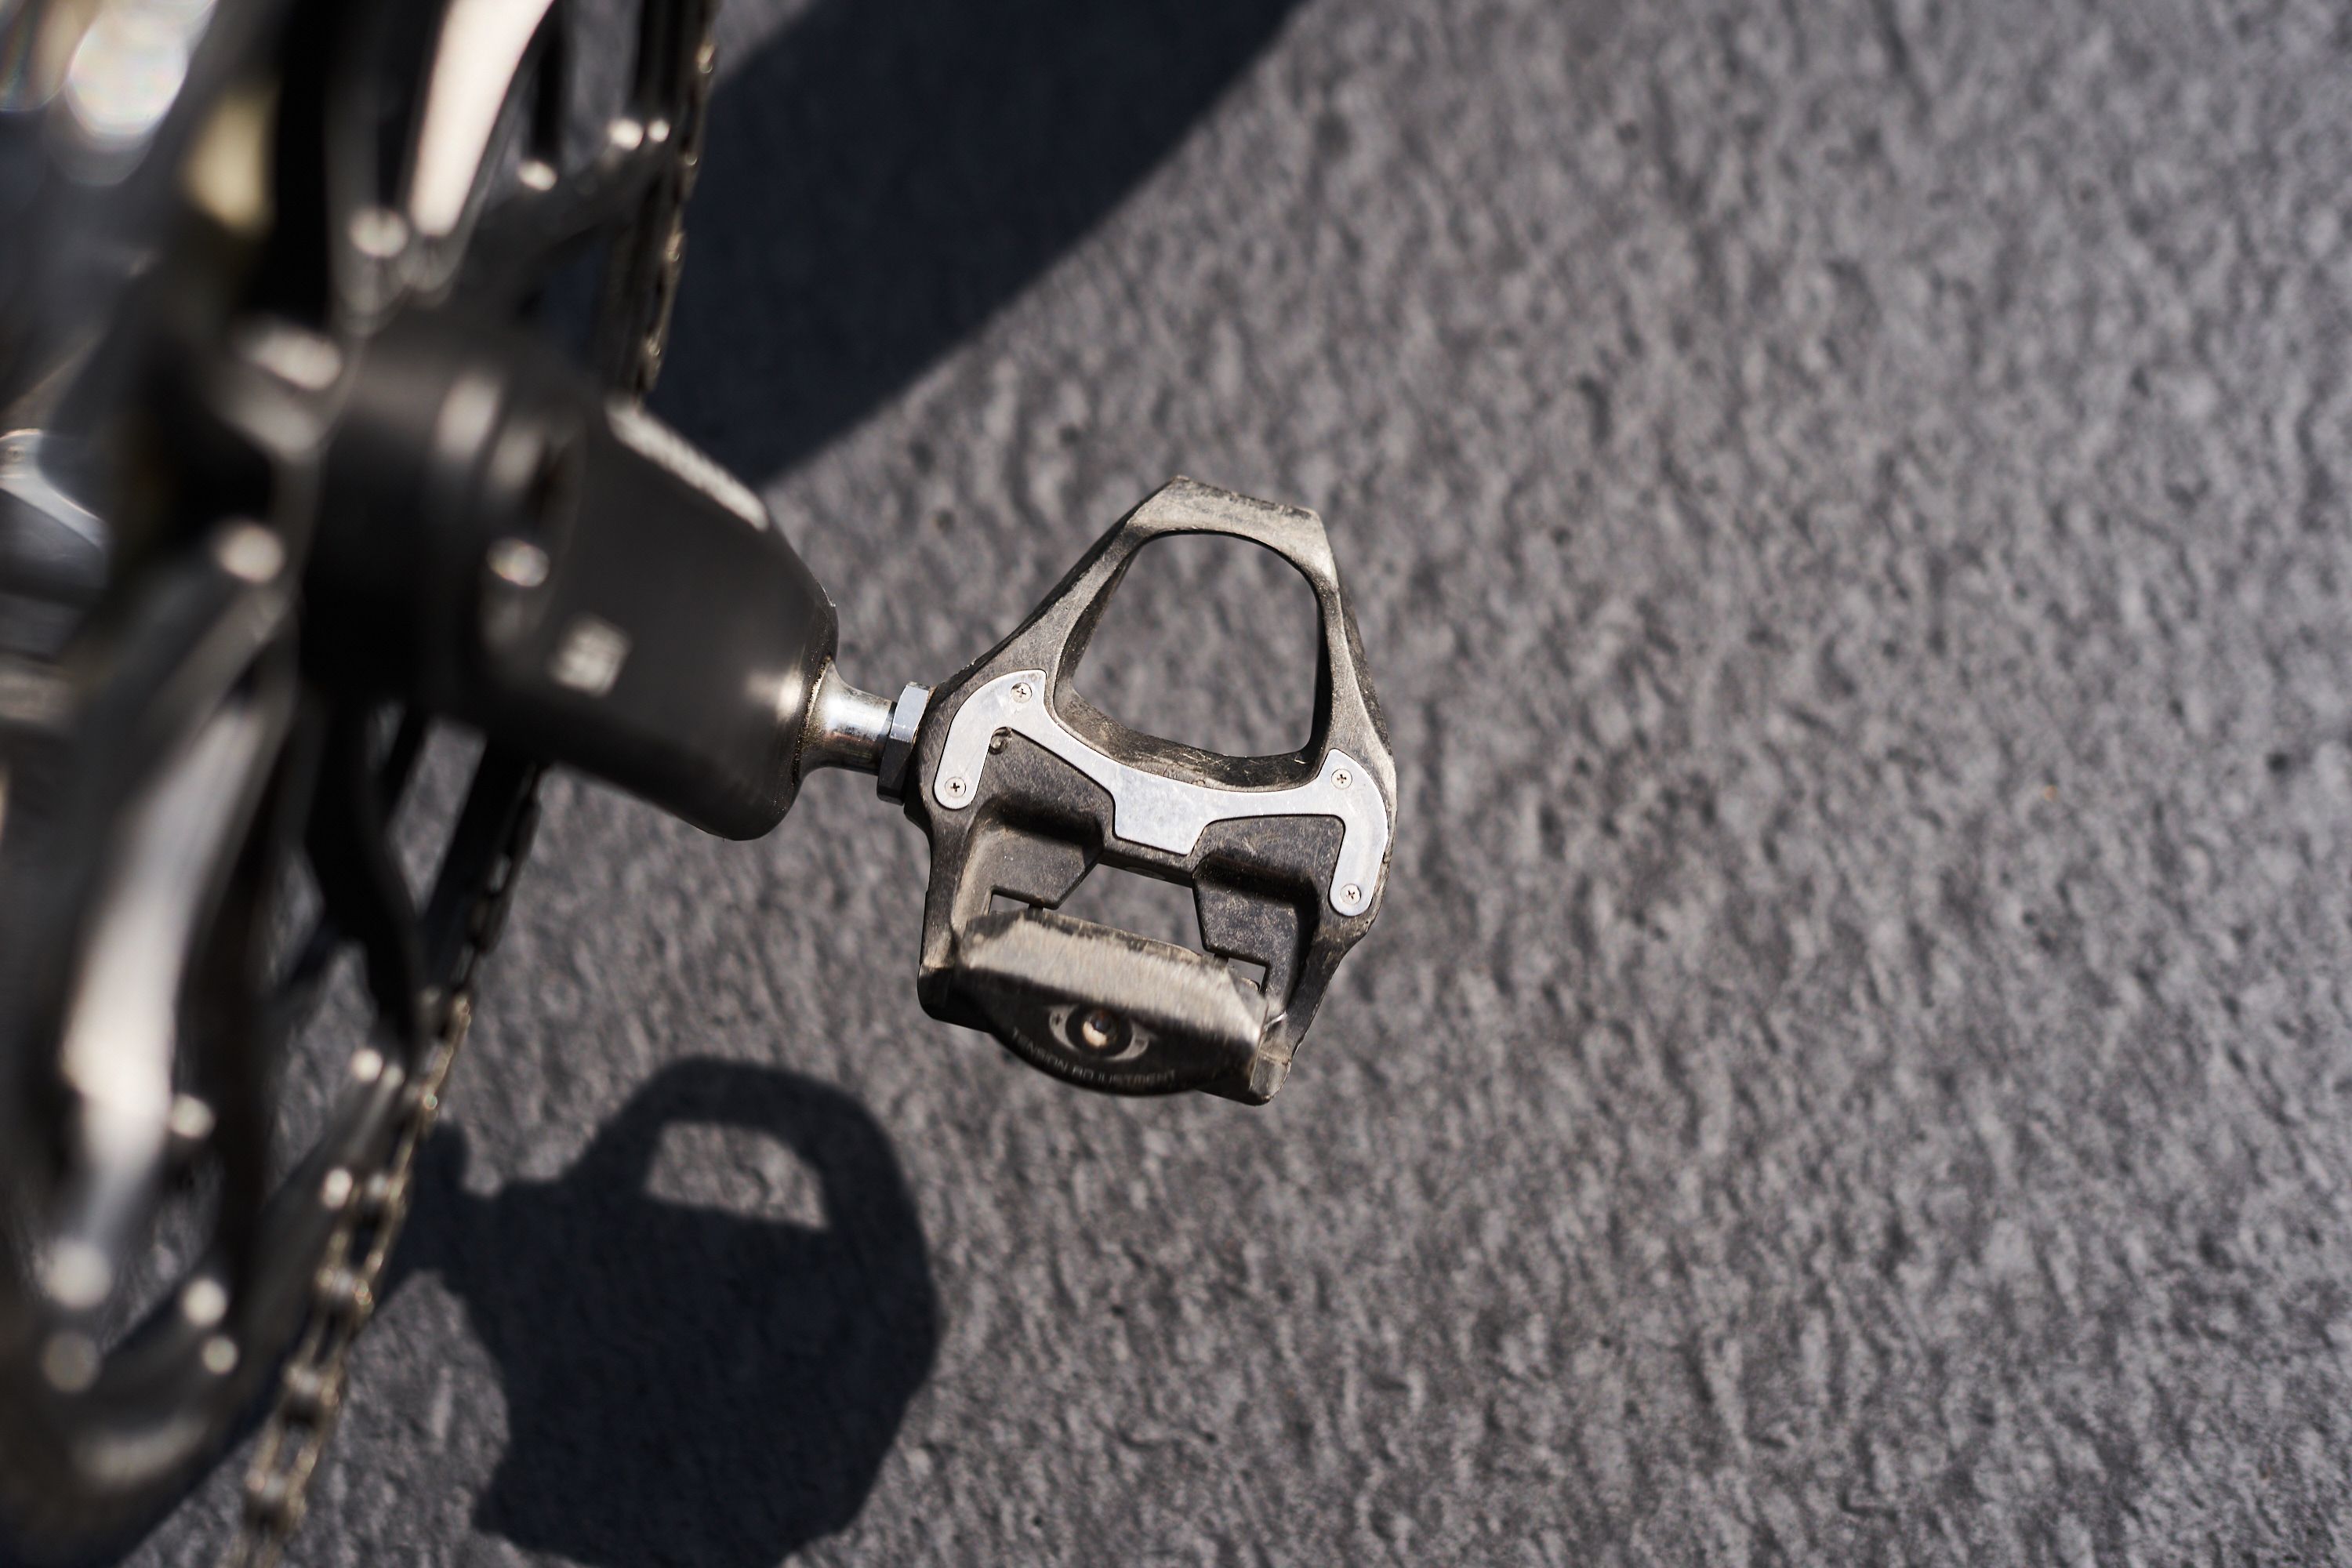 installing shimano pedals